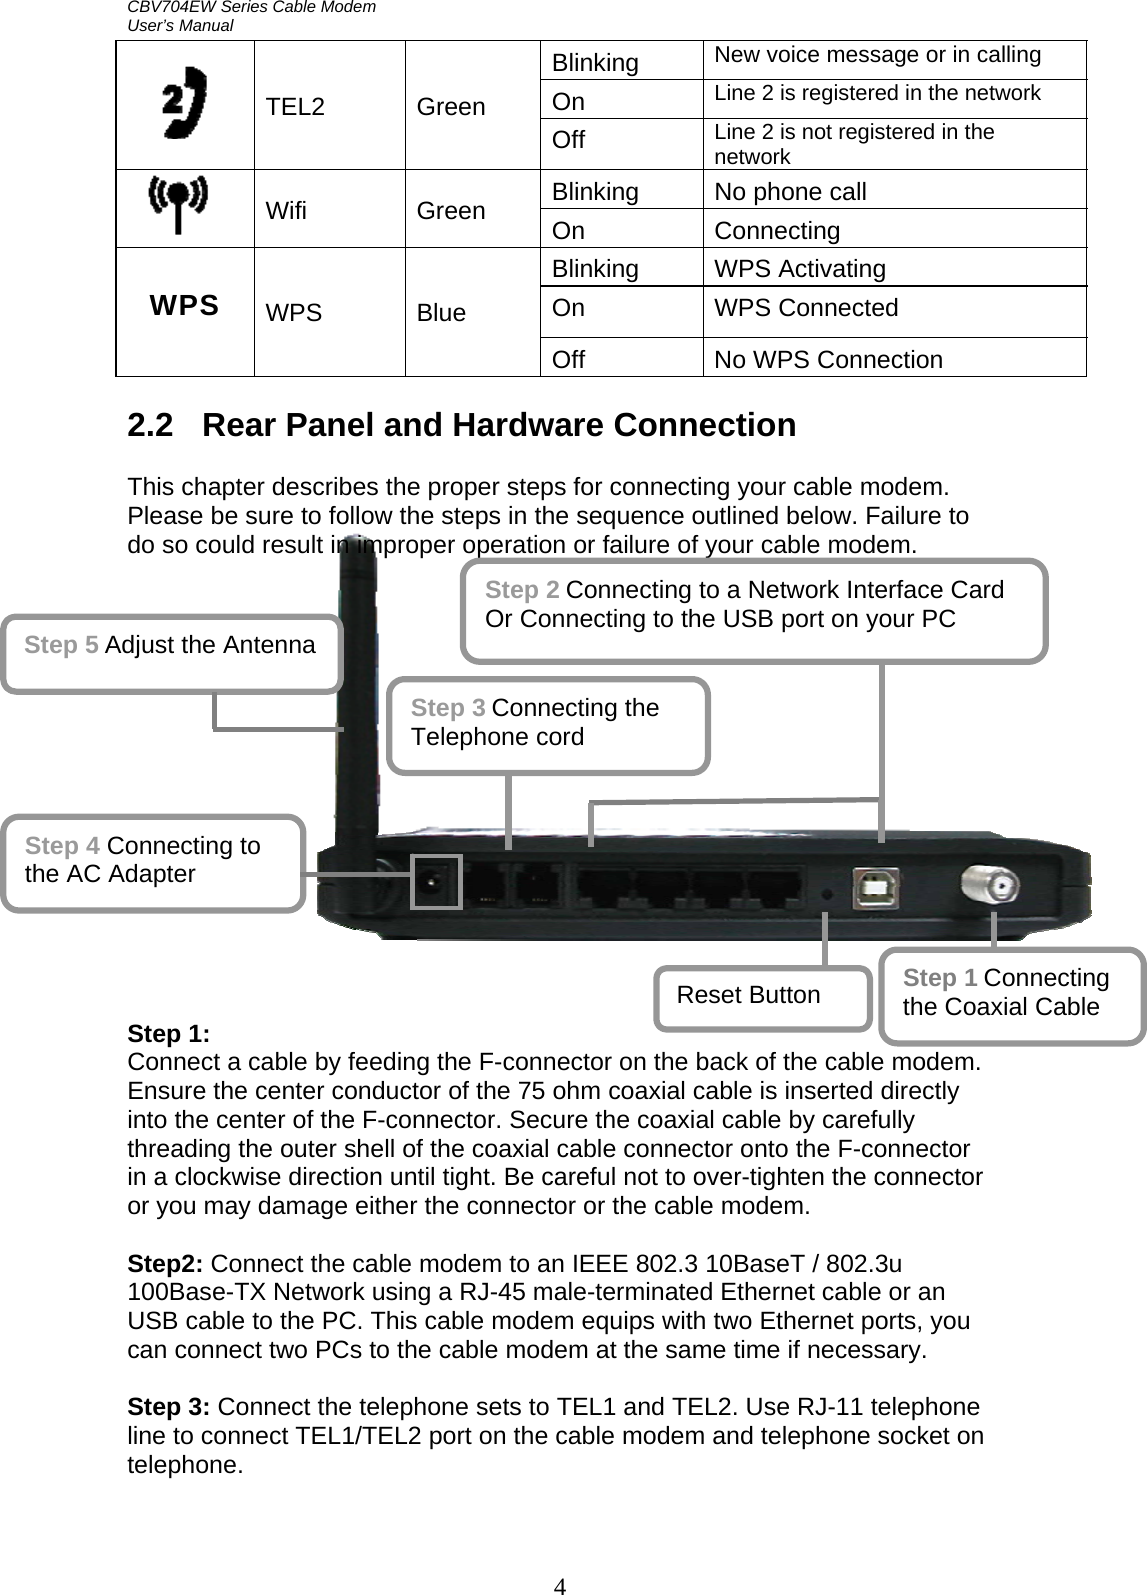 CBV704EW Series Cable Modem  User’s Manual 4  Blinking New voice message or in calling On  Line 2 is registered in the network  TEL2 Green Off  Line 2 is not registered in the network Blinking  No phone call   Wifi Green On   Connecting   Blinking  WPS Activating     WPS   WPS  Blue  On  WPS Connected         Off  No WPS Connection     2.2  Rear Panel and Hardware Connection  This chapter describes the proper steps for connecting your cable modem. Please be sure to follow the steps in the sequence outlined below. Failure to do so could result in improper operation or failure of your cable modem.                 Step 1: Connect a cable by feeding the F-connector on the back of the cable modem. Ensure the center conductor of the 75 ohm coaxial cable is inserted directly into the center of the F-connector. Secure the coaxial cable by carefully threading the outer shell of the coaxial cable connector onto the F-connector in a clockwise direction until tight. Be careful not to over-tighten the connector or you may damage either the connector or the cable modem.  Step2: Connect the cable modem to an IEEE 802.3 10BaseT / 802.3u 100Base-TX Network using a RJ-45 male-terminated Ethernet cable or an USB cable to the PC. This cable modem equips with two Ethernet ports, you can connect two PCs to the cable modem at the same time if necessary.  Step 3: Connect the telephone sets to TEL1 and TEL2. Use RJ-11 telephone line to connect TEL1/TEL2 port on the cable modem and telephone socket on telephone.  Step 1 Connecting the Coaxial Cable Step 3 Connecting the Telephone cord Step 5 Adjust the Antenna Step 4 Connecting to the AC Adapter Step 2 Connecting to a Network Interface Card Or Connecting to the USB port on your PC Reset Button 